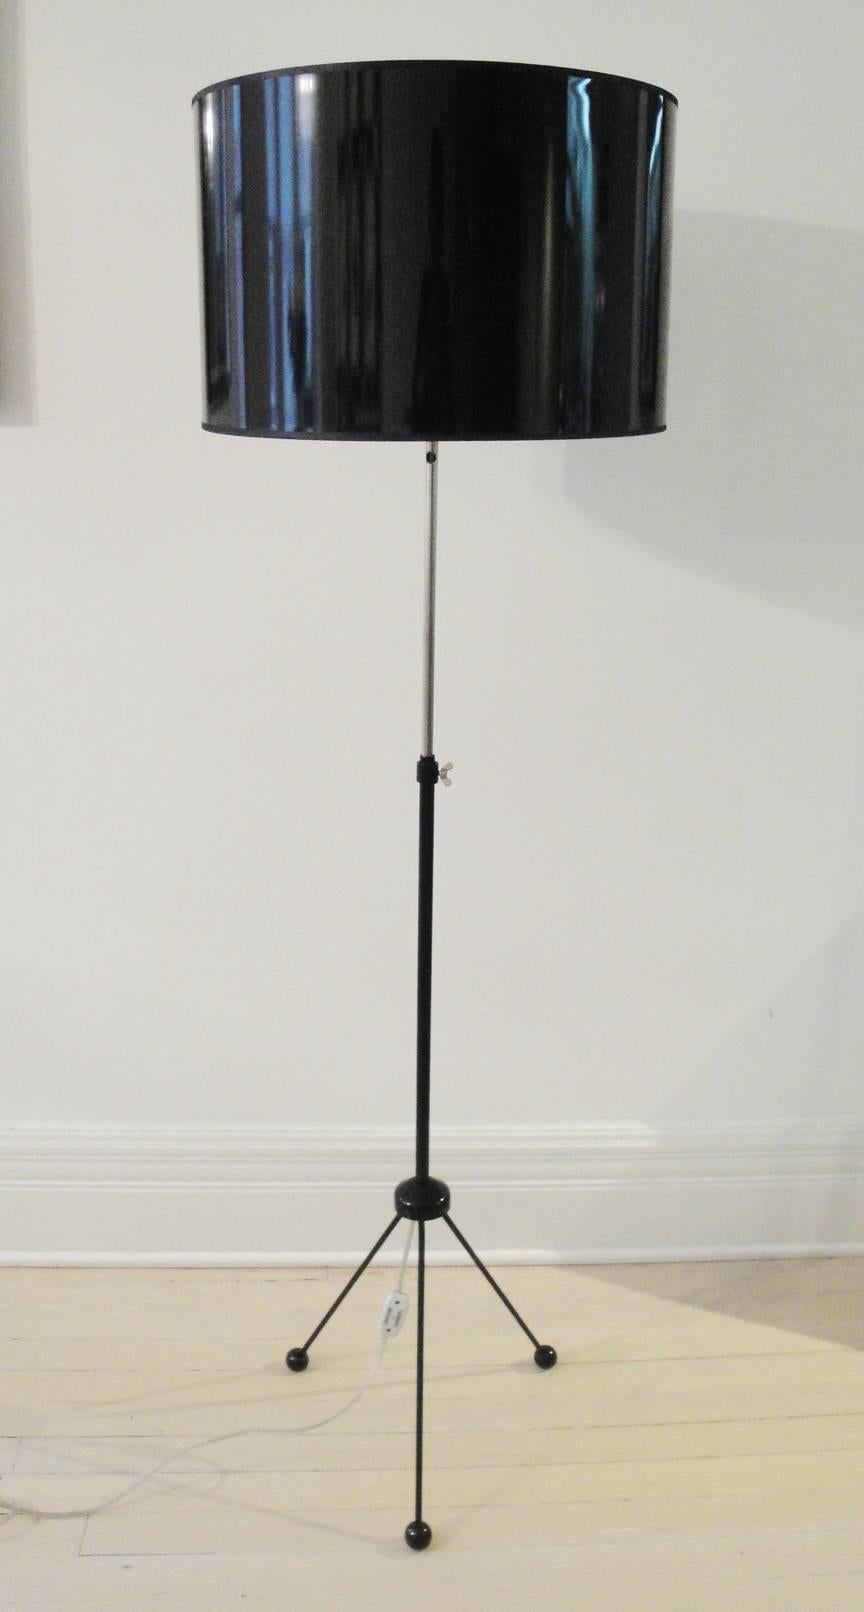 Fully restored black enameled metal tripod lamp. Painted wood feet, metal structure and new high gloss lacquered black shade. Hight is adjustable, maximum 62